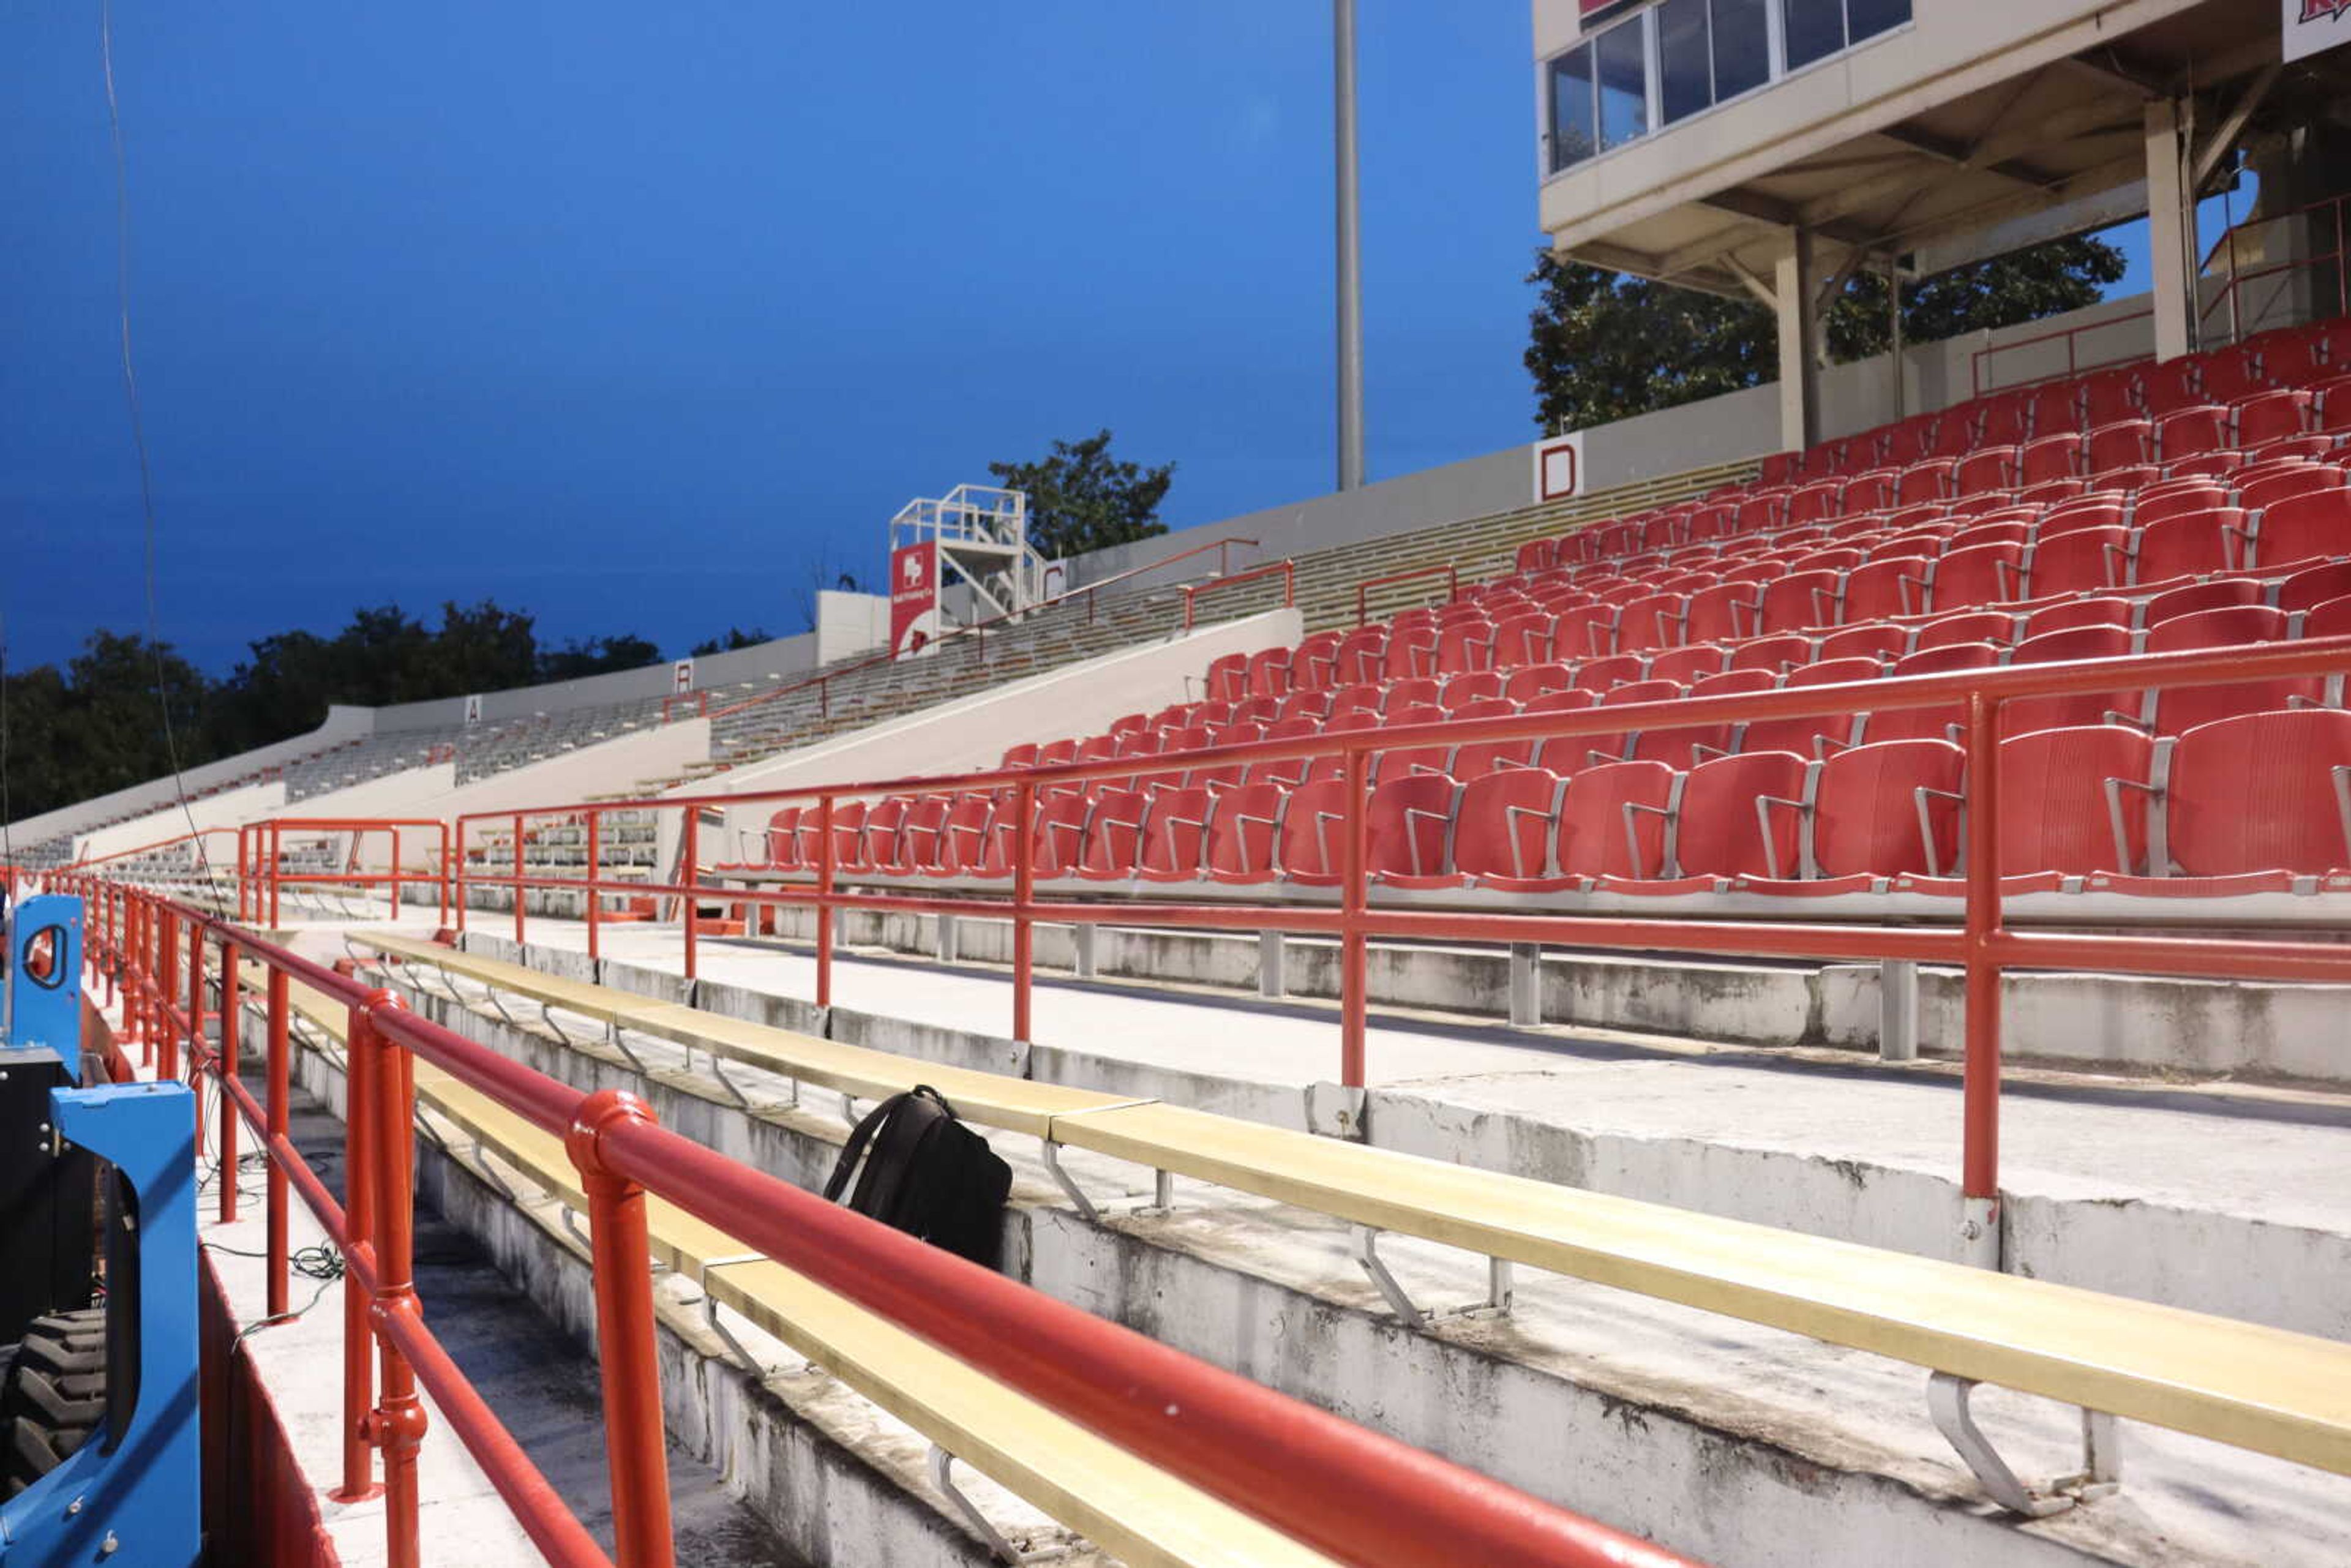 SEMO Board of Governors approves proposal for destruction and renovation of Houck Stadium South Grandstand